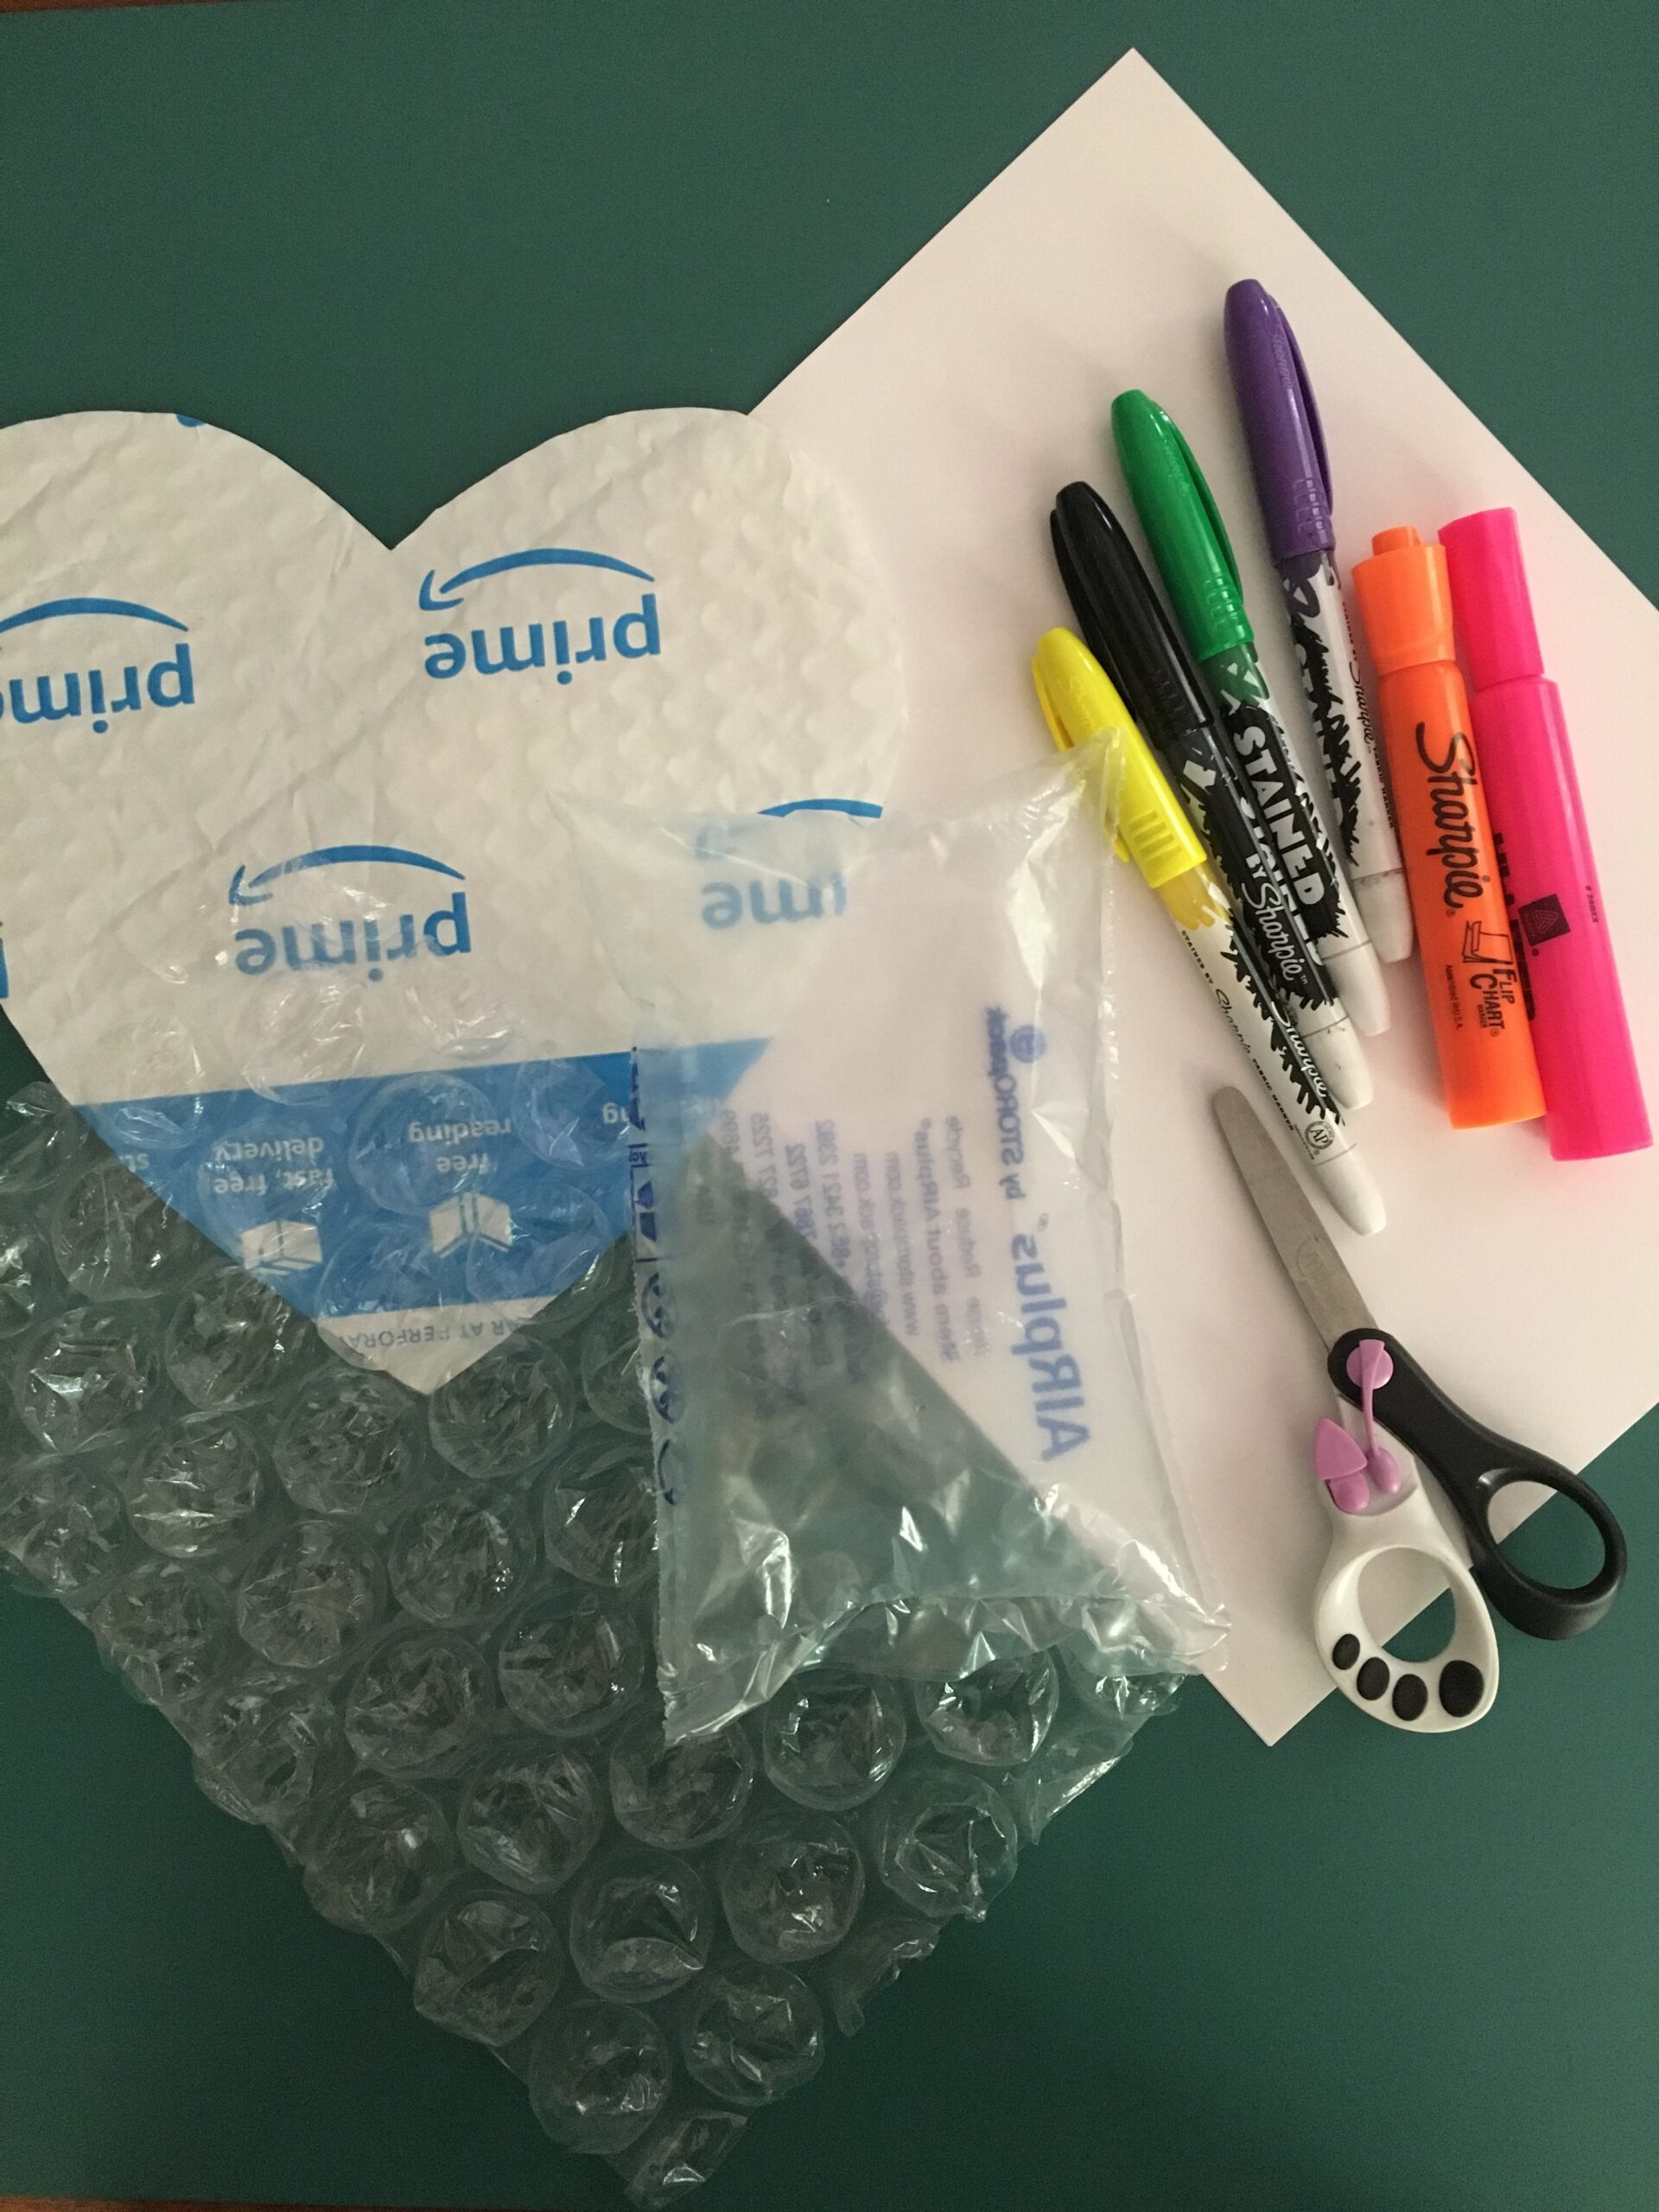 Supplies listed for this project grouped together on a table: bubble wrap, markers, scissors, paper, plastic bag